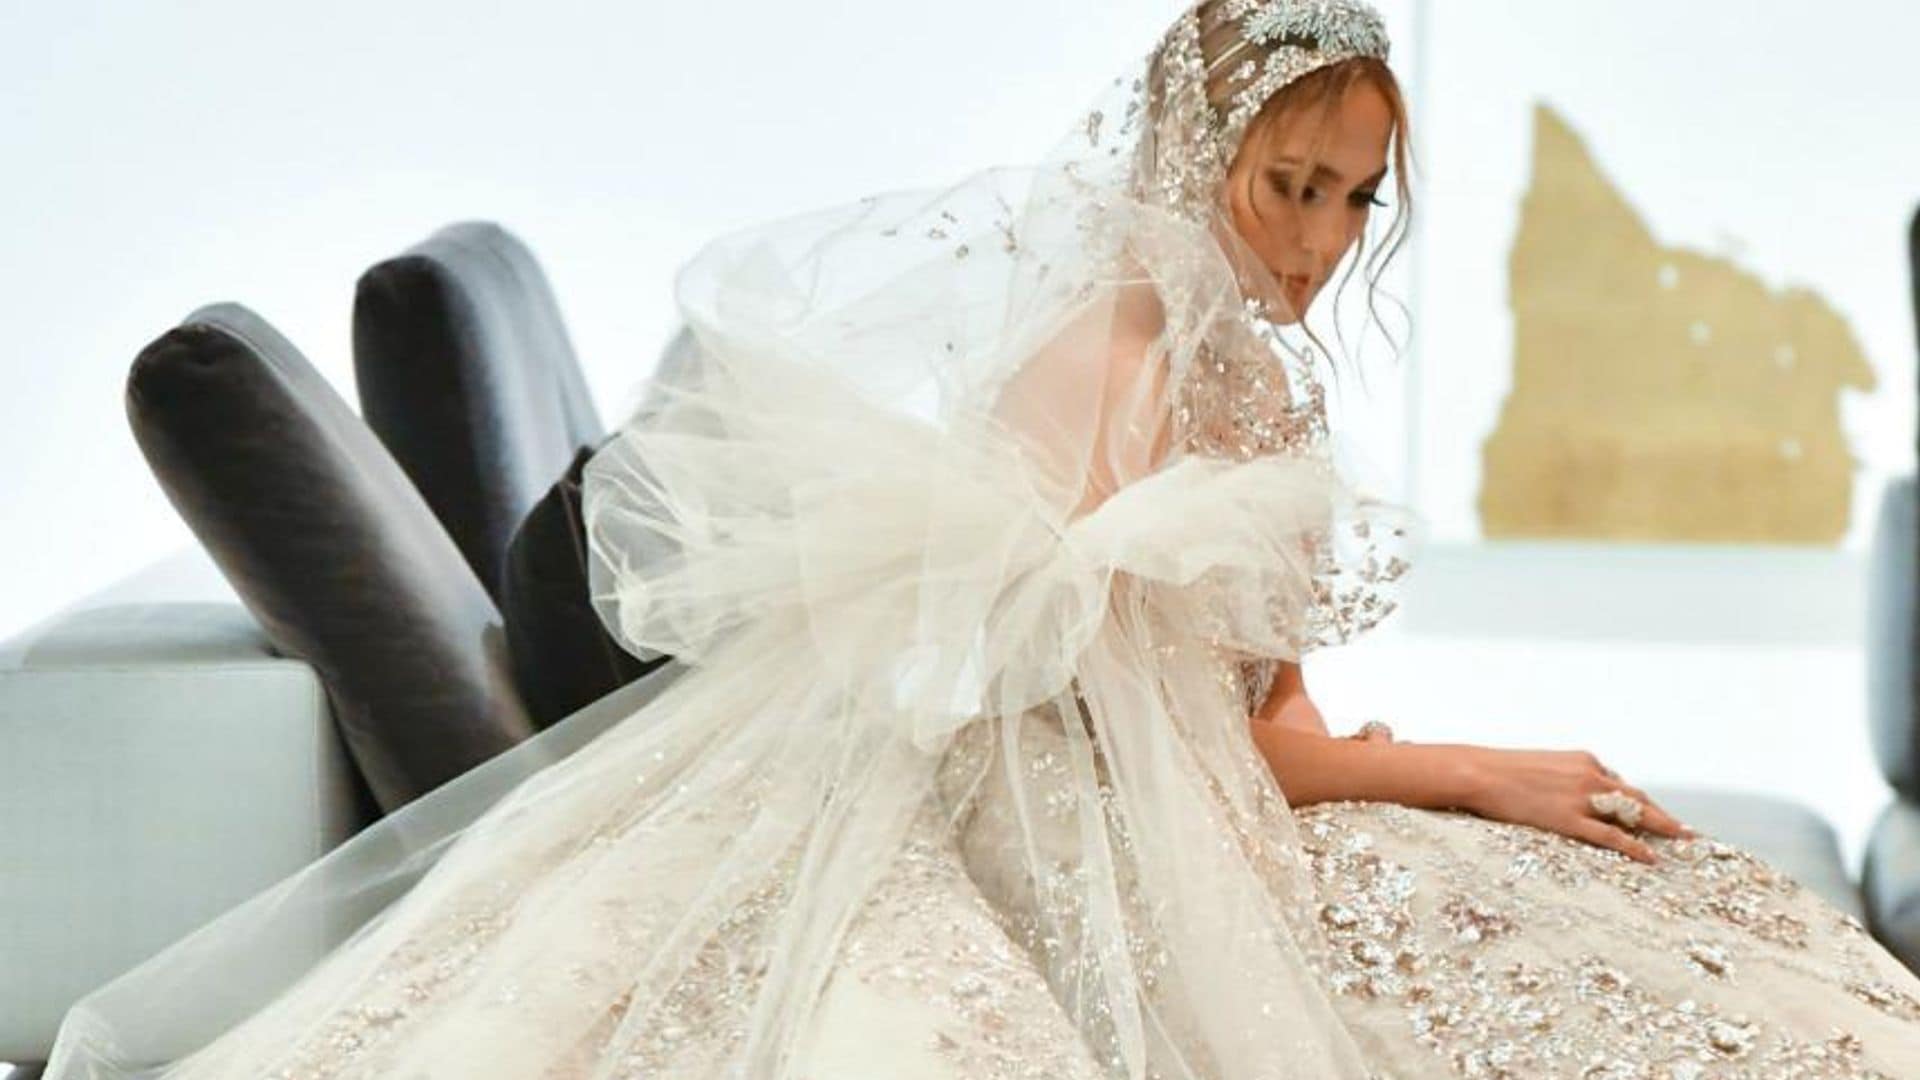 JLo exudes Sofia Vergara vibes in wedding gown and our jaws have dropped (on the floor)